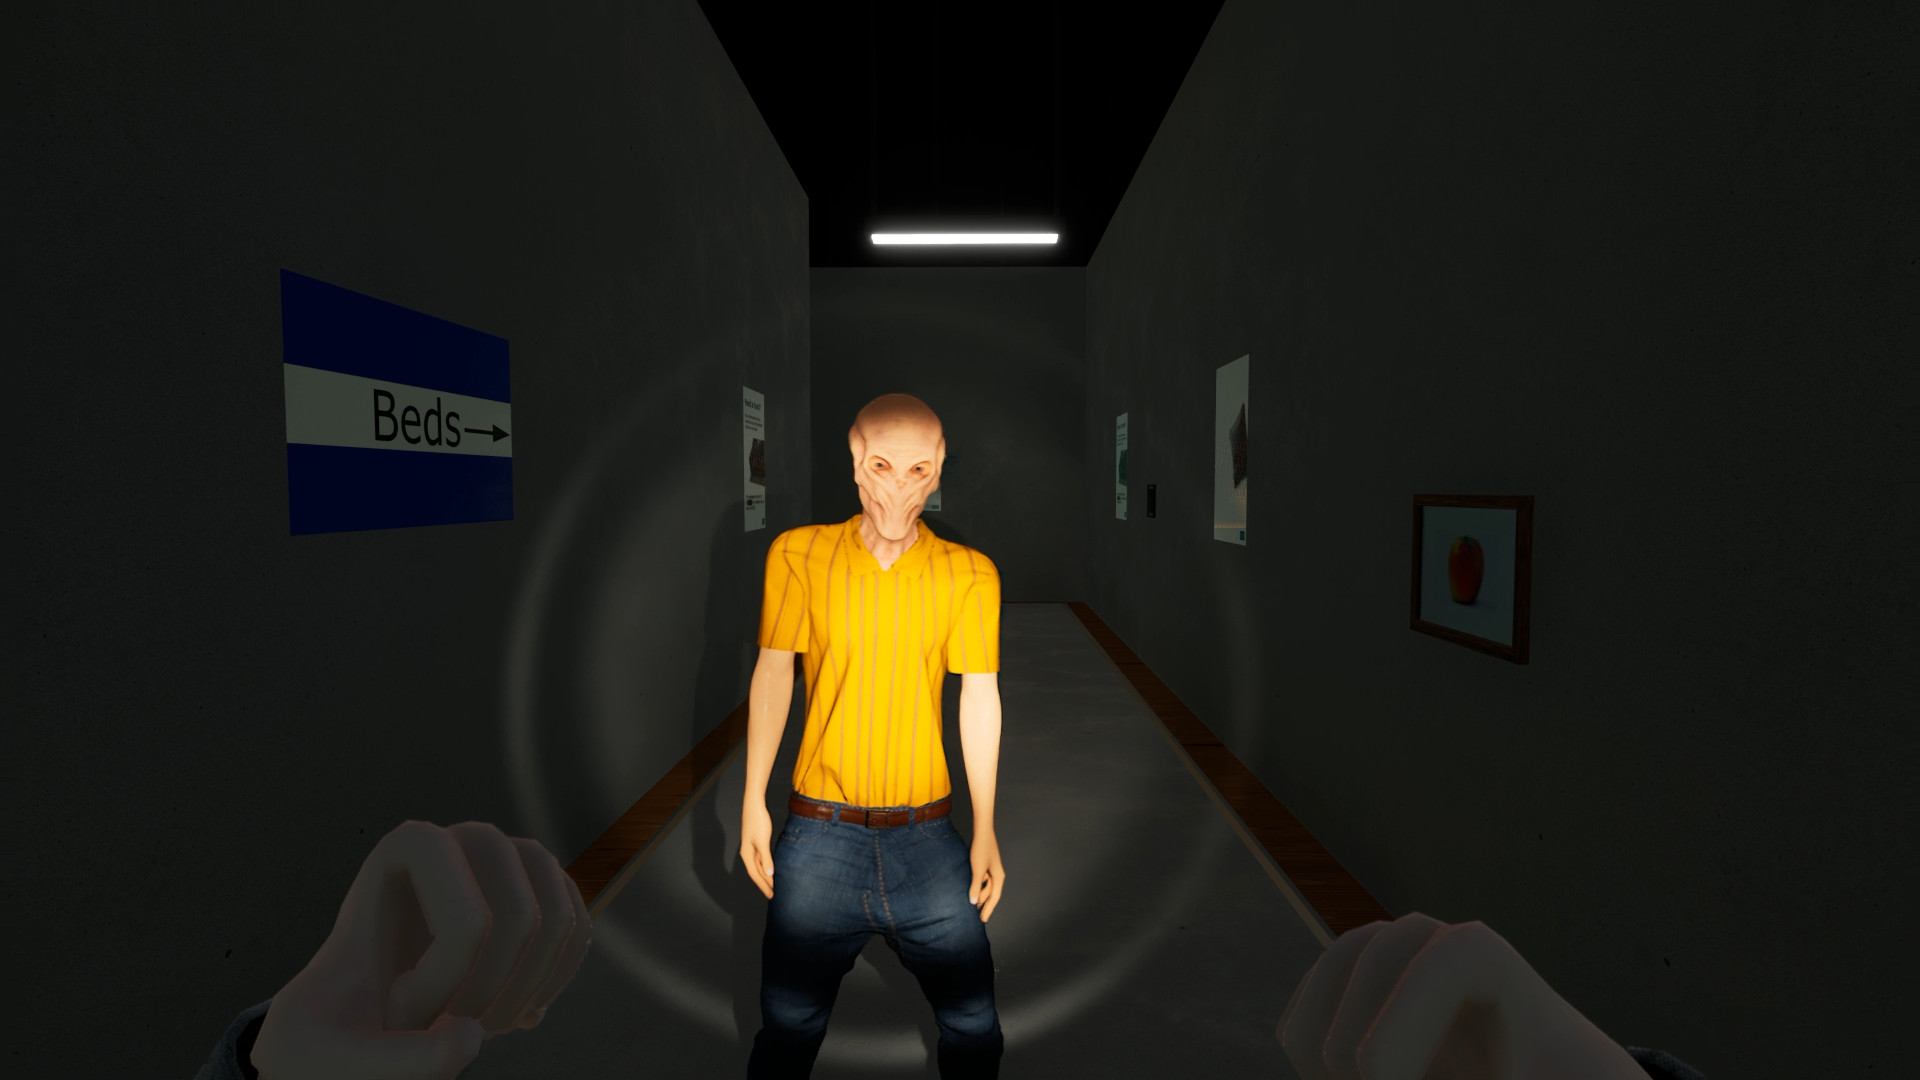 BUILDING house to CAPTURE SCP-3008 in ROBLOX?